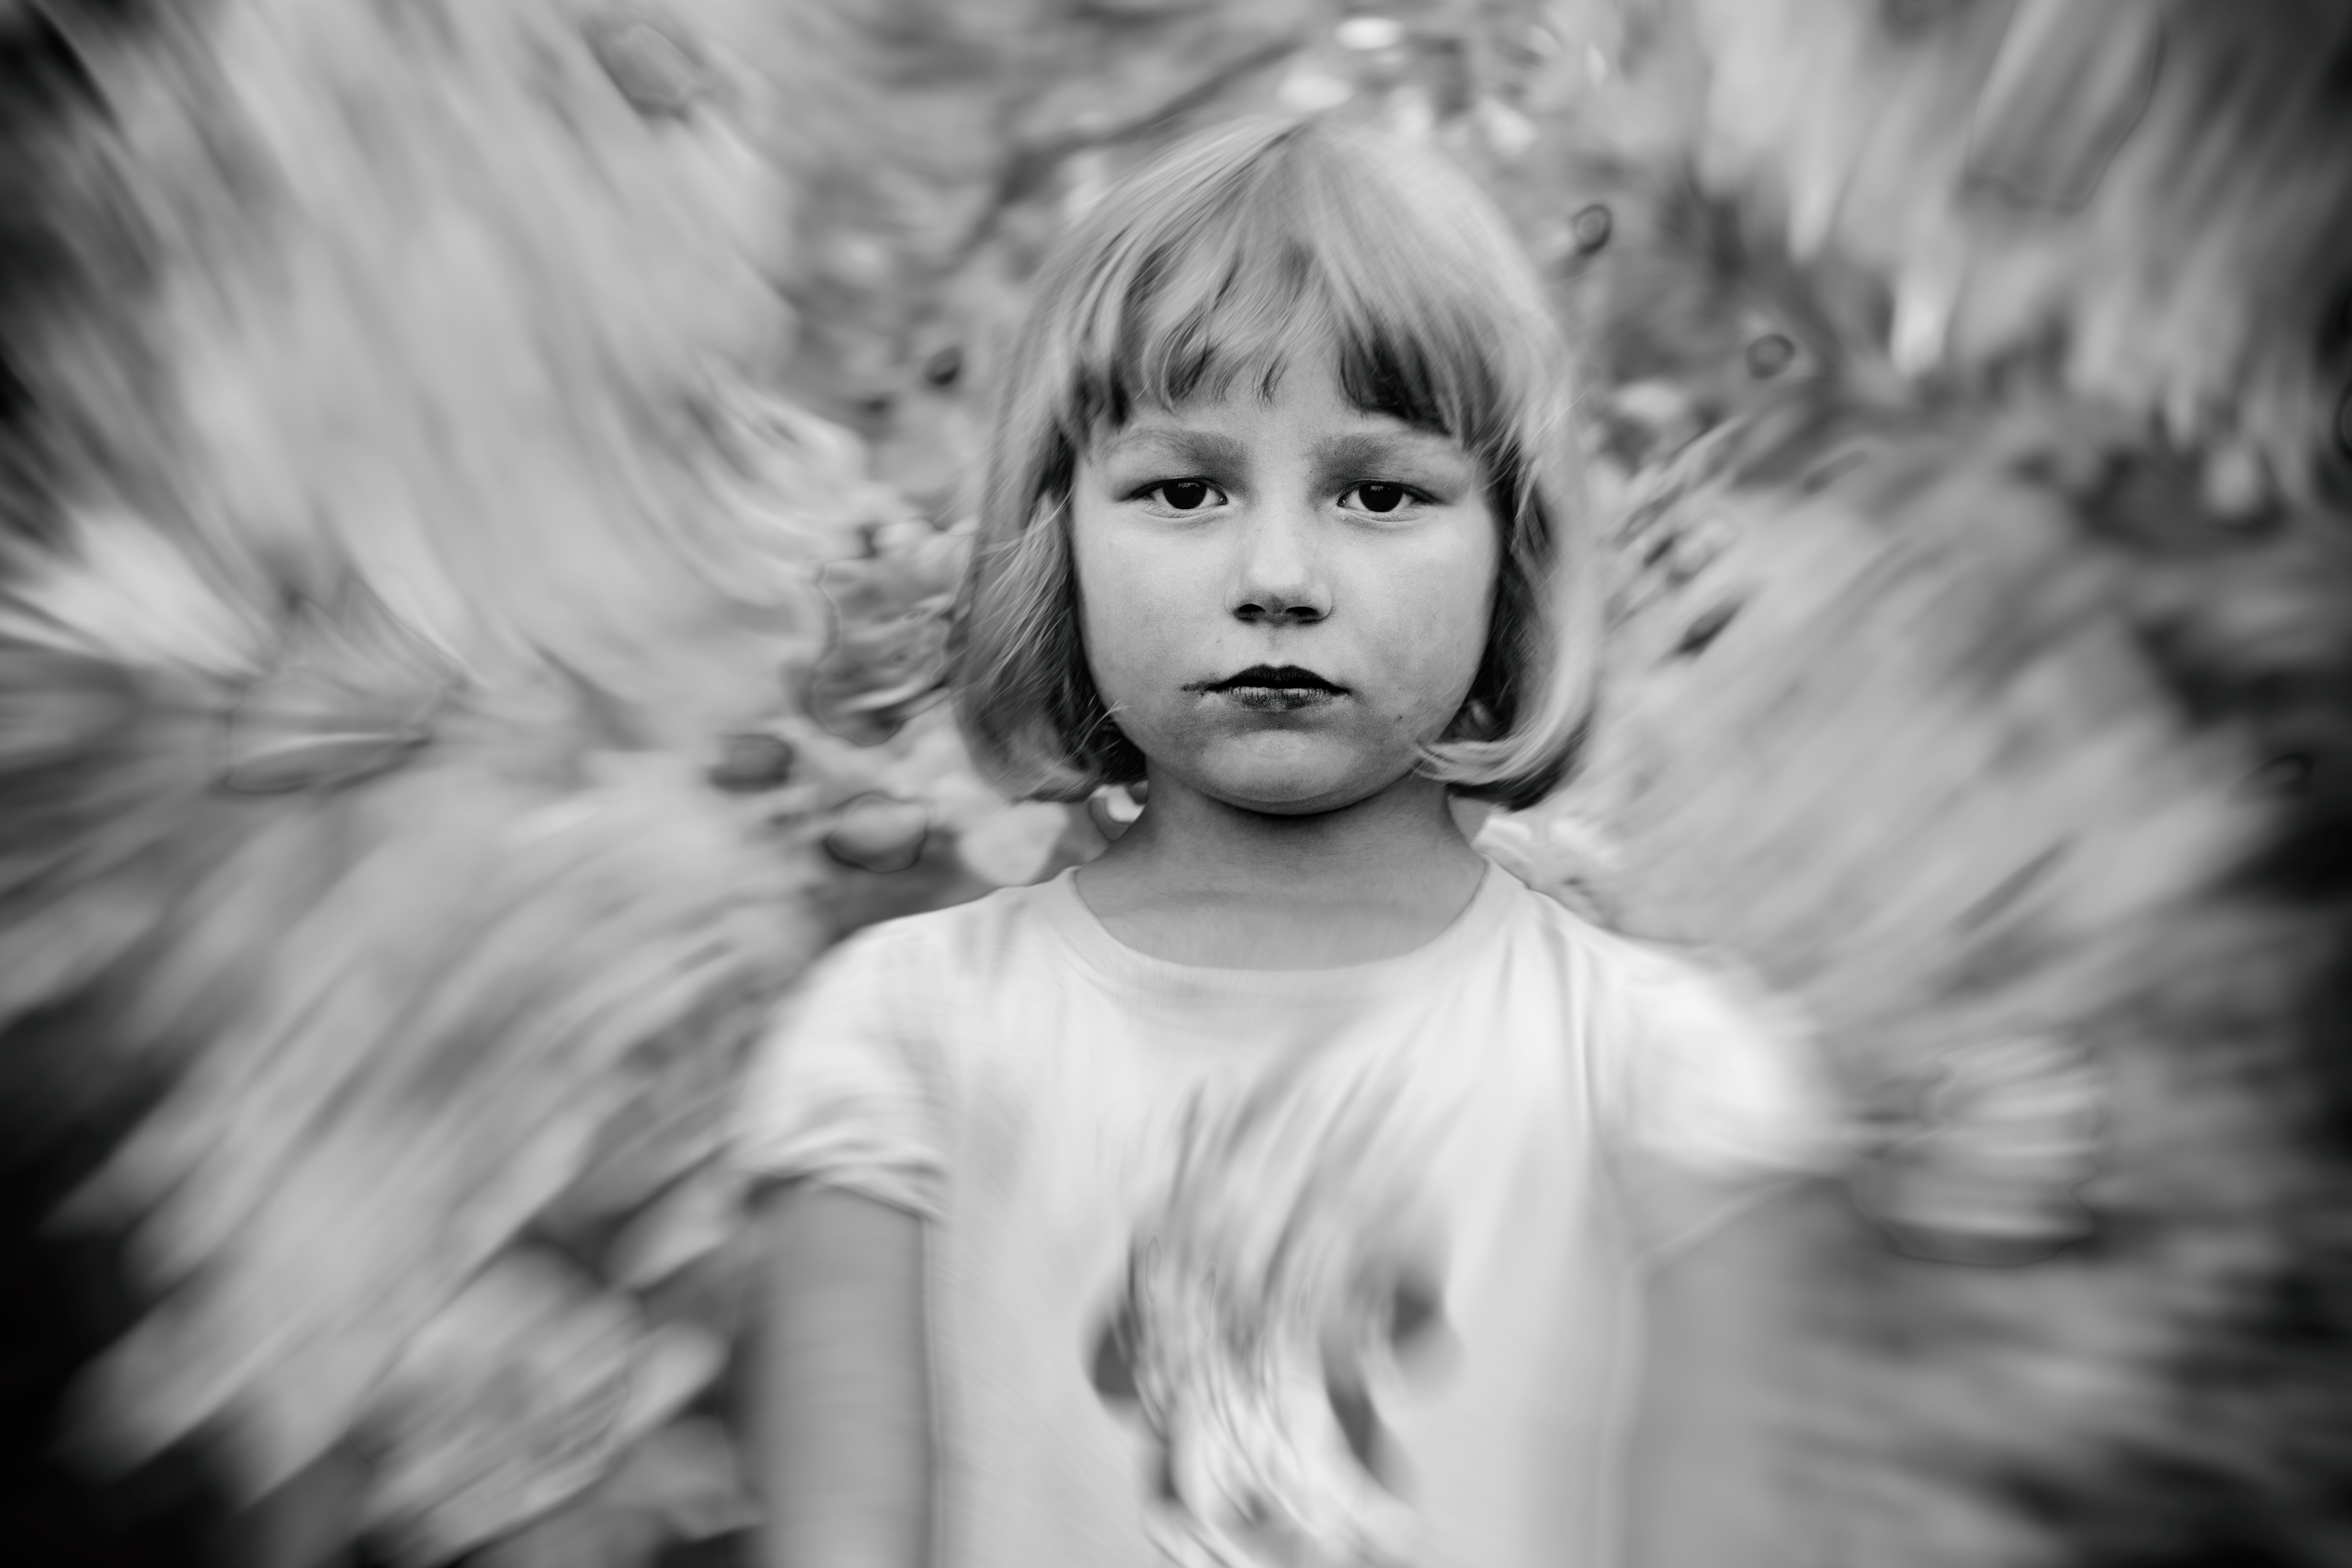 Tomislav Stajduhar; Swirl Girl, 2017, Original Photography Black and White, 45 x 30 cm. Artwork description: 241 Portrait of a young girl caught in a visual swirl. ...